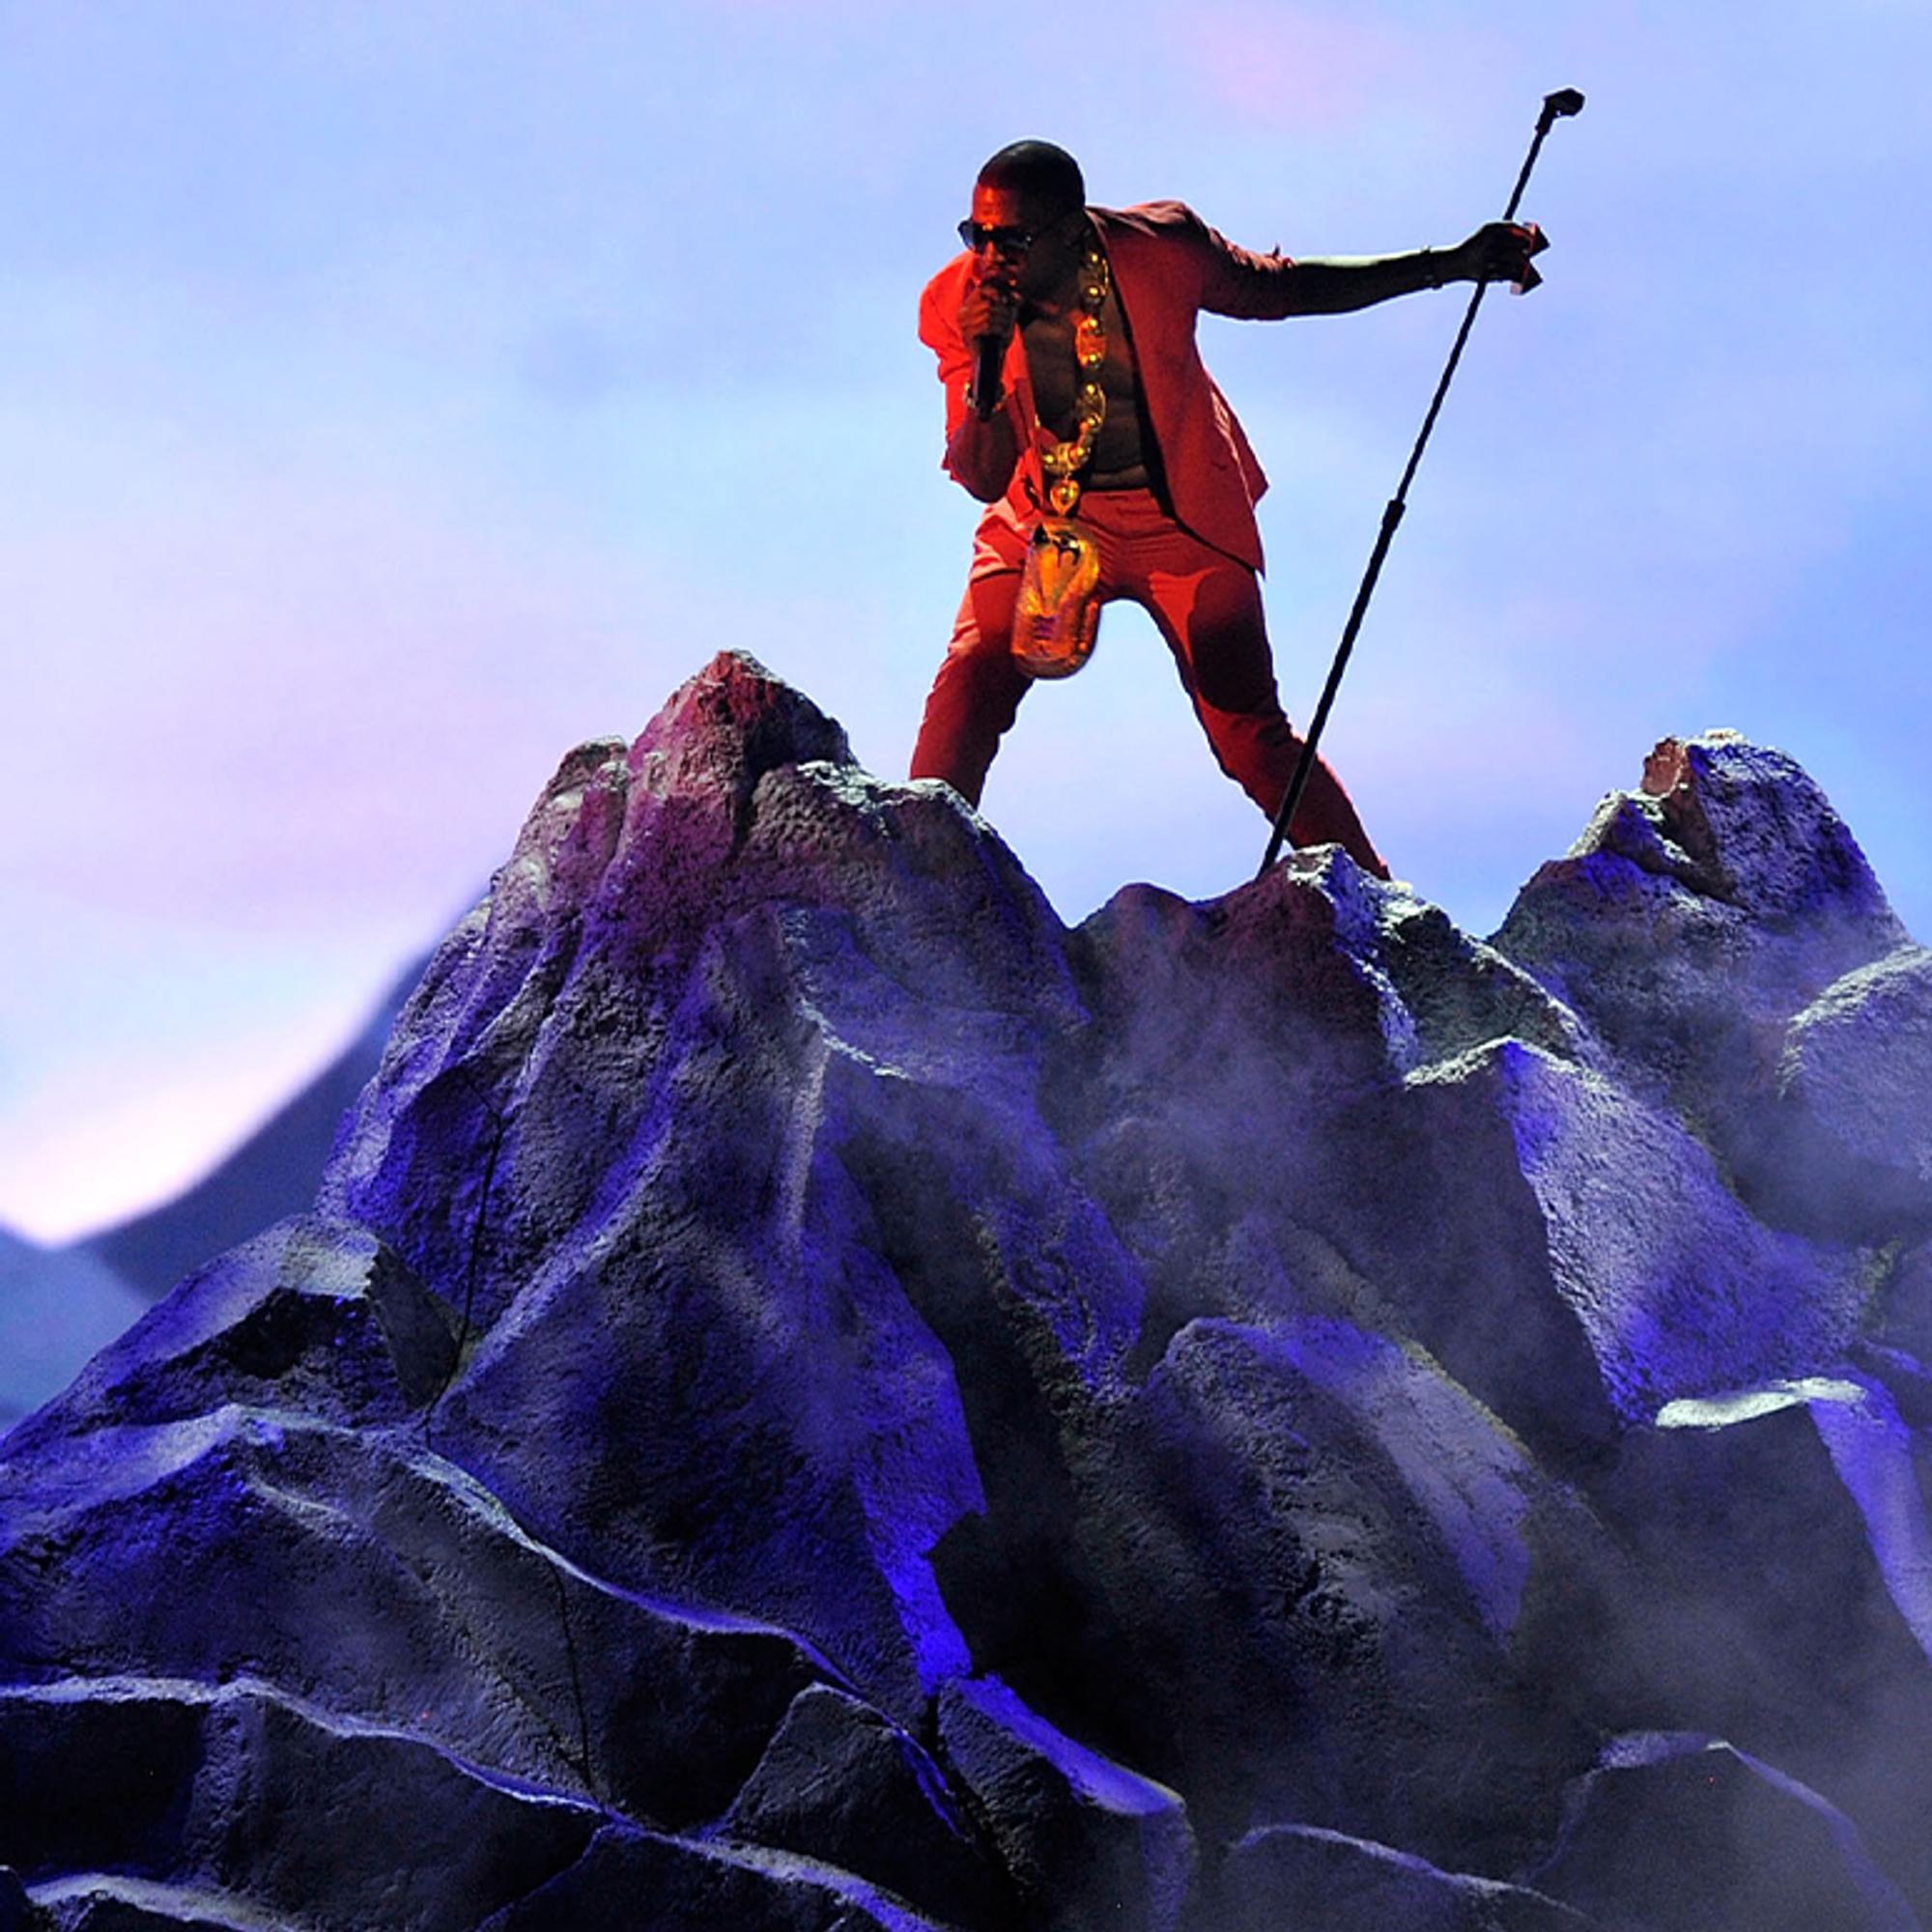 Kanye West in red performing on a rocky blue stage set